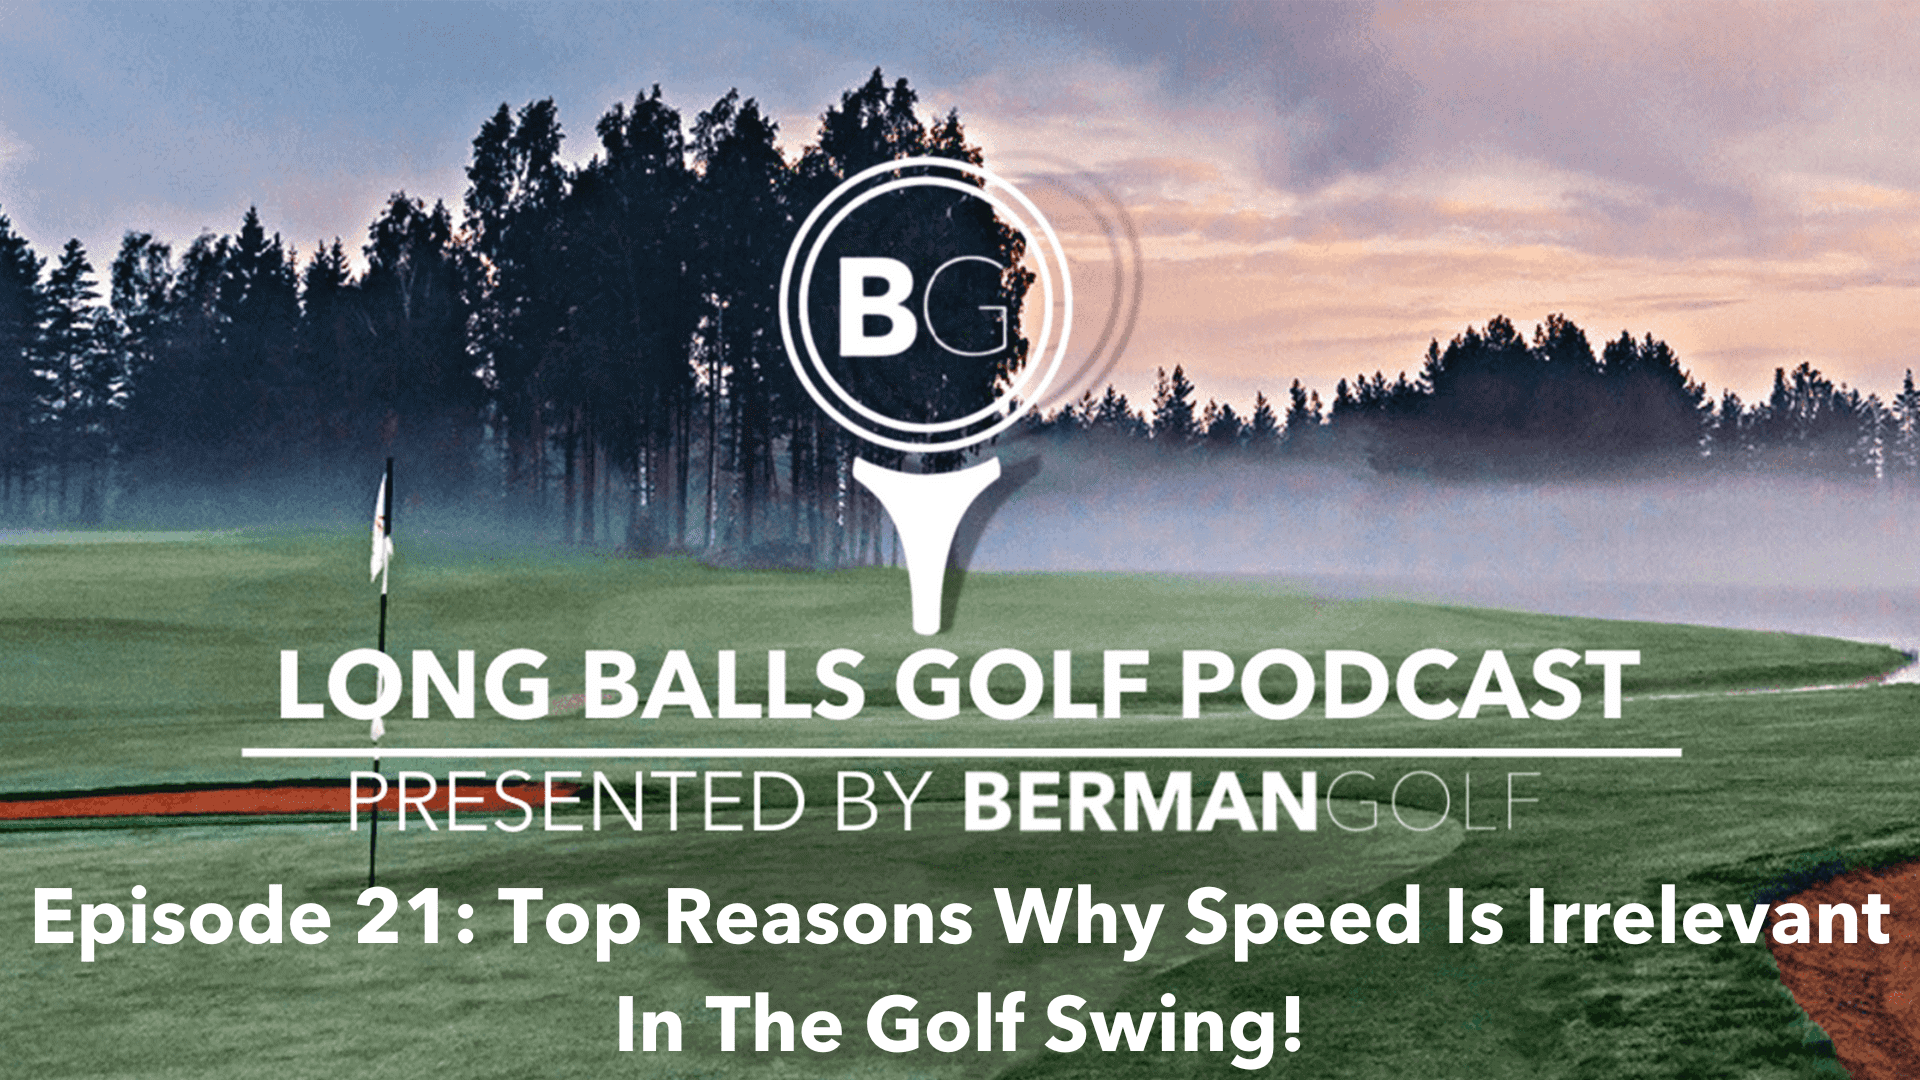 Episode 21: Top Reasons Why Speed Is Irrelevant In The Golf Swing!